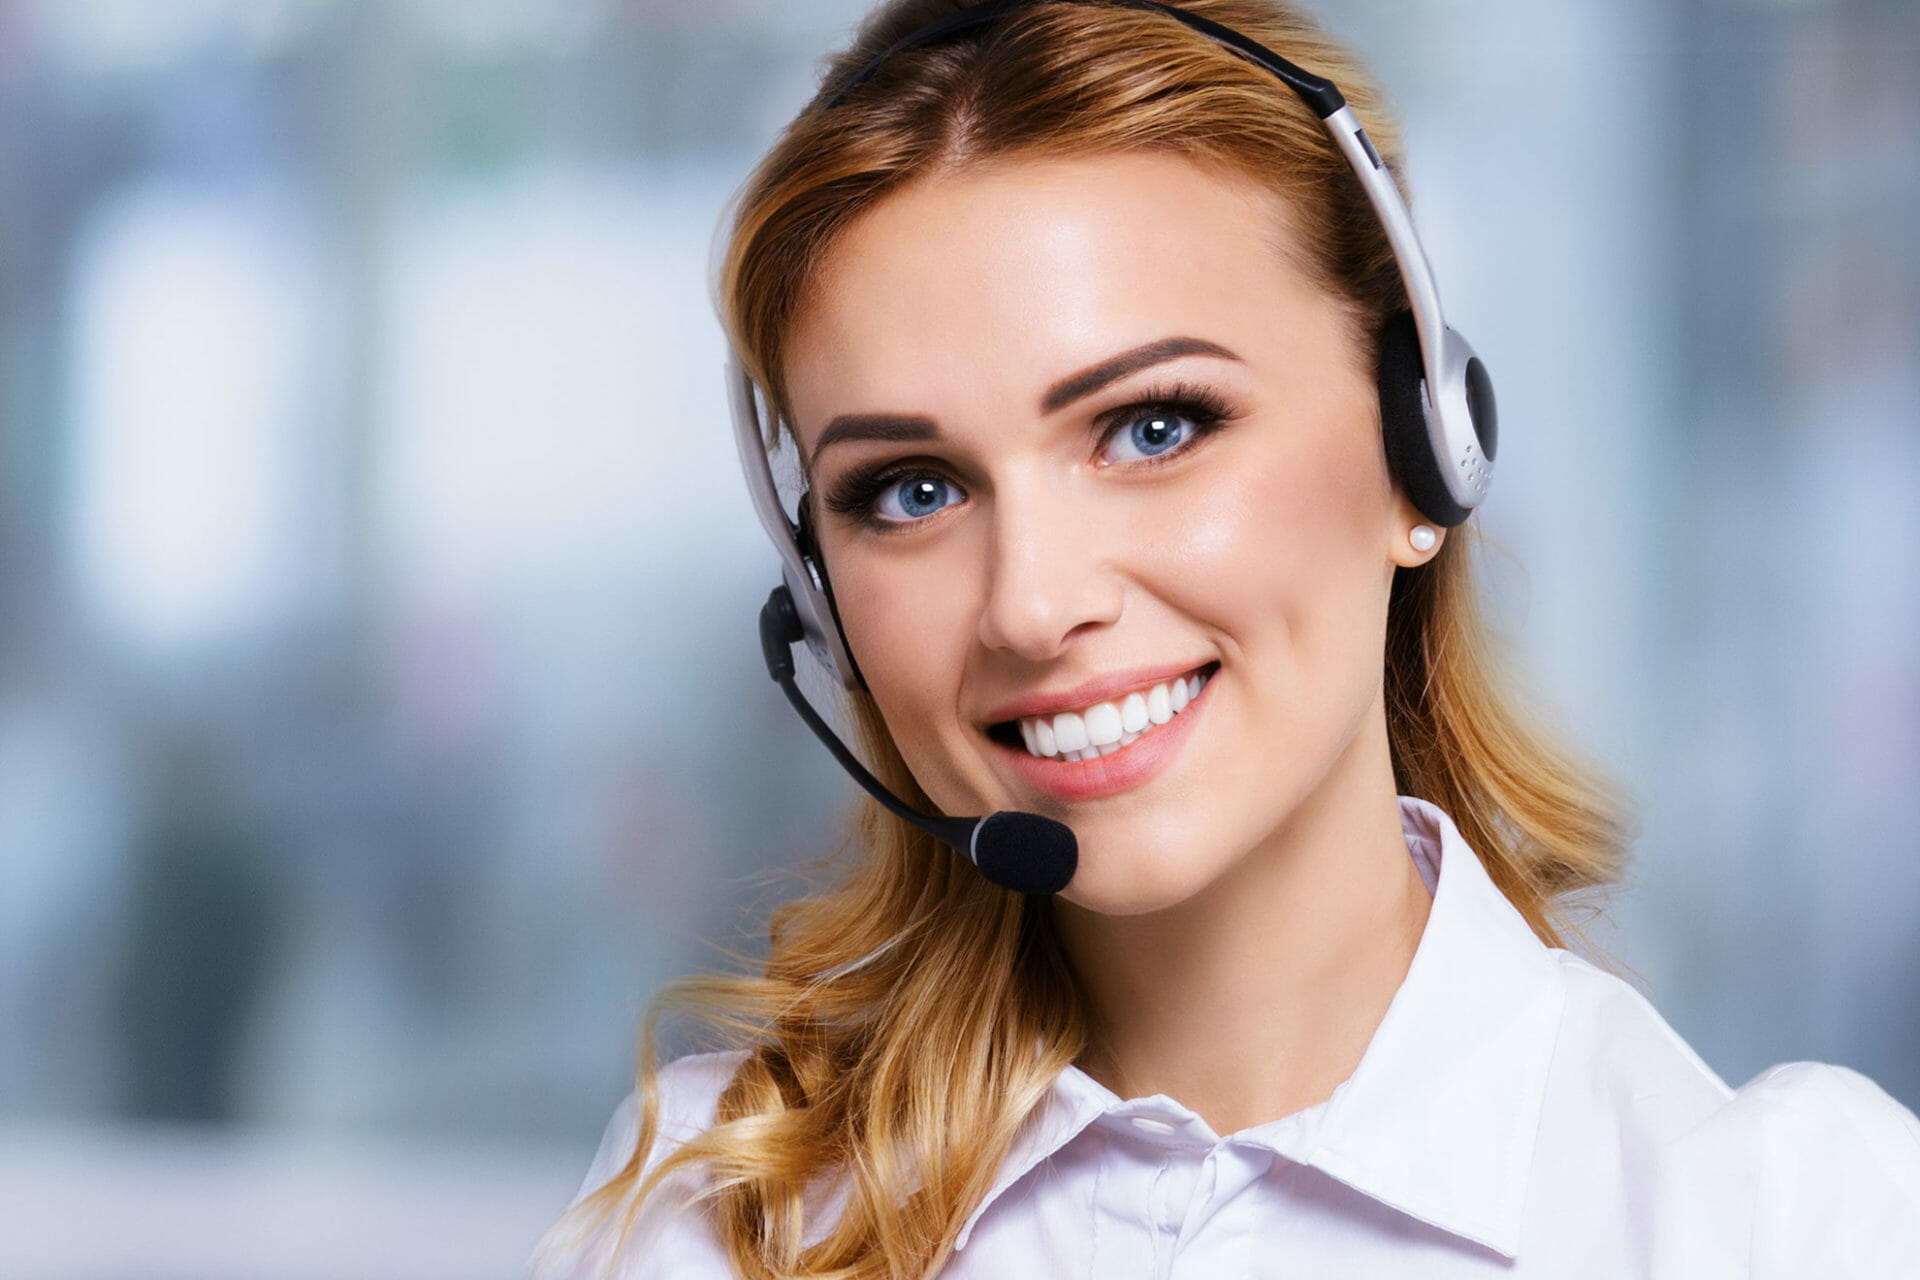 Smiling woman in a call center